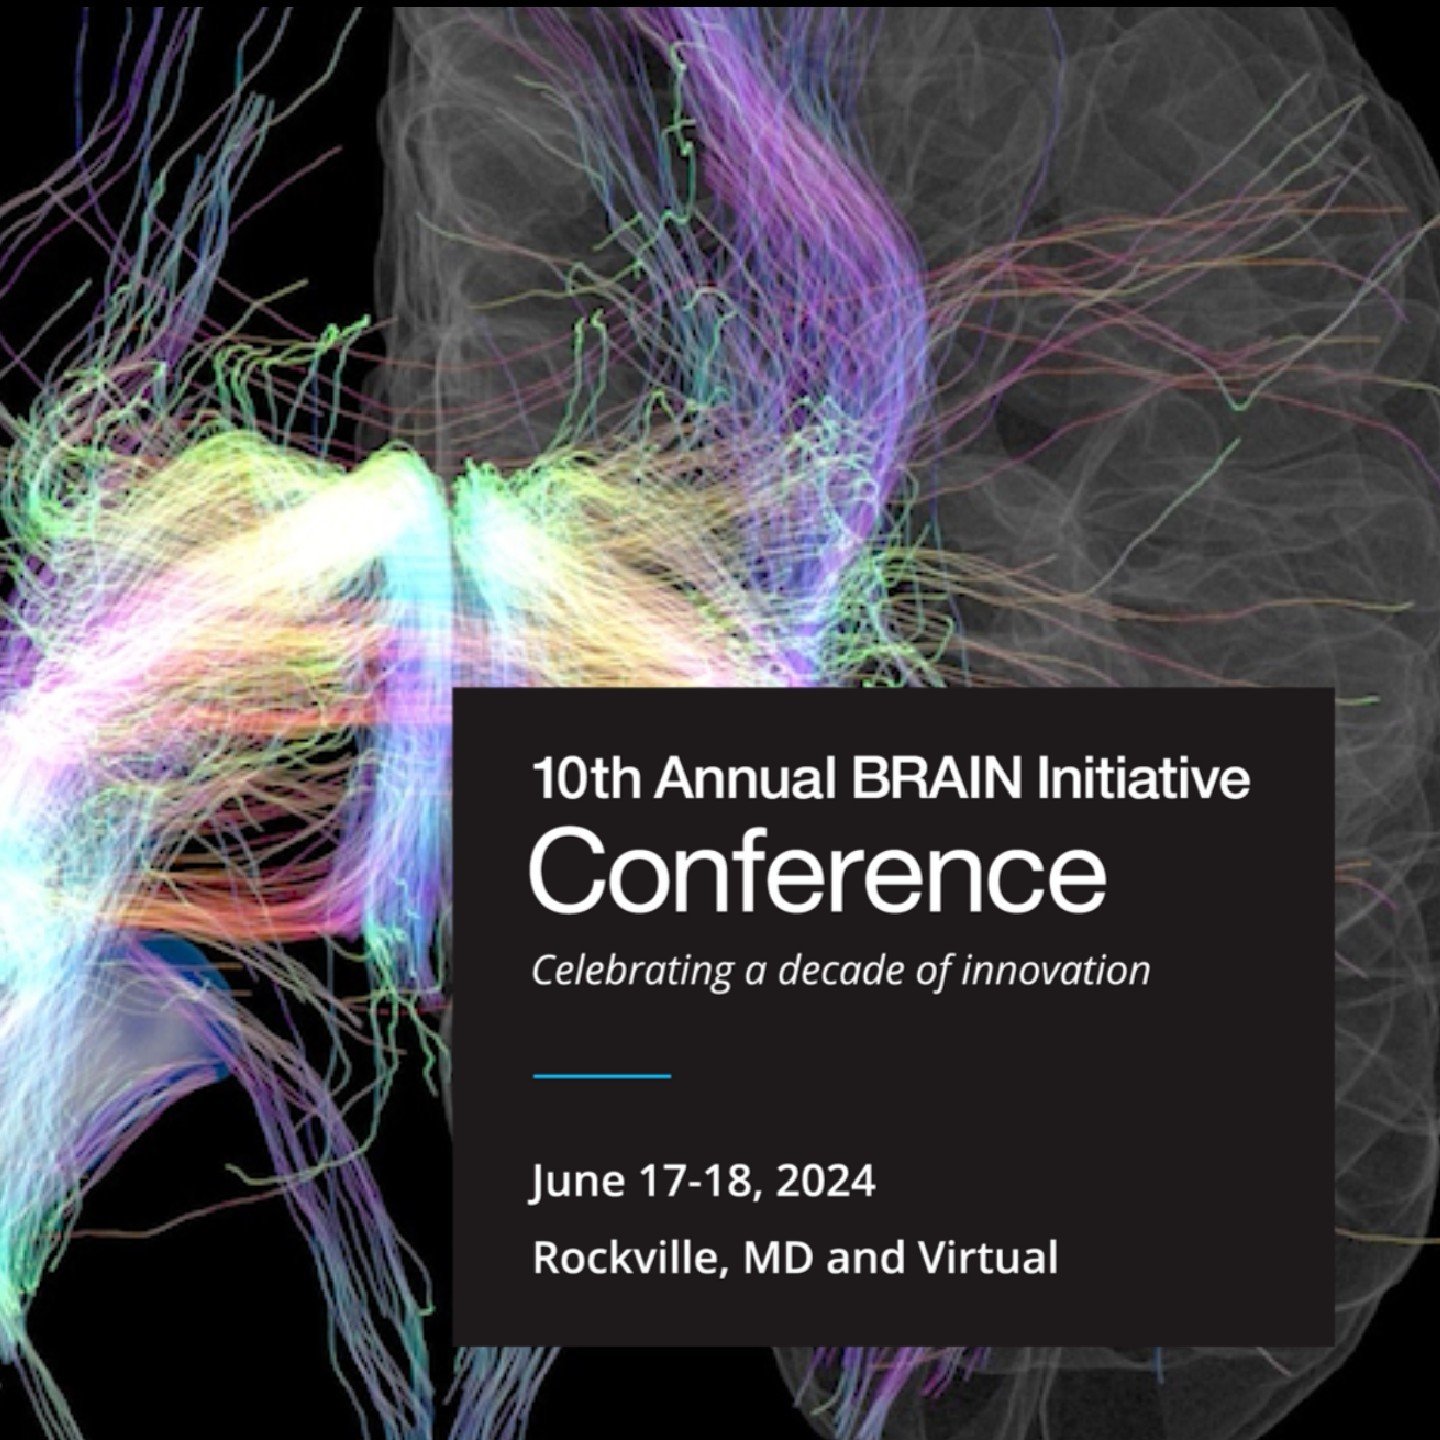 Have you registered for the 10th Annual #BRAINInitiative Conference? 🧠

Now in its tenth year, this hybrid meeting aims to continue building the BRAIN community, provide a forum for discussing exciting scientific developments and potential new direc